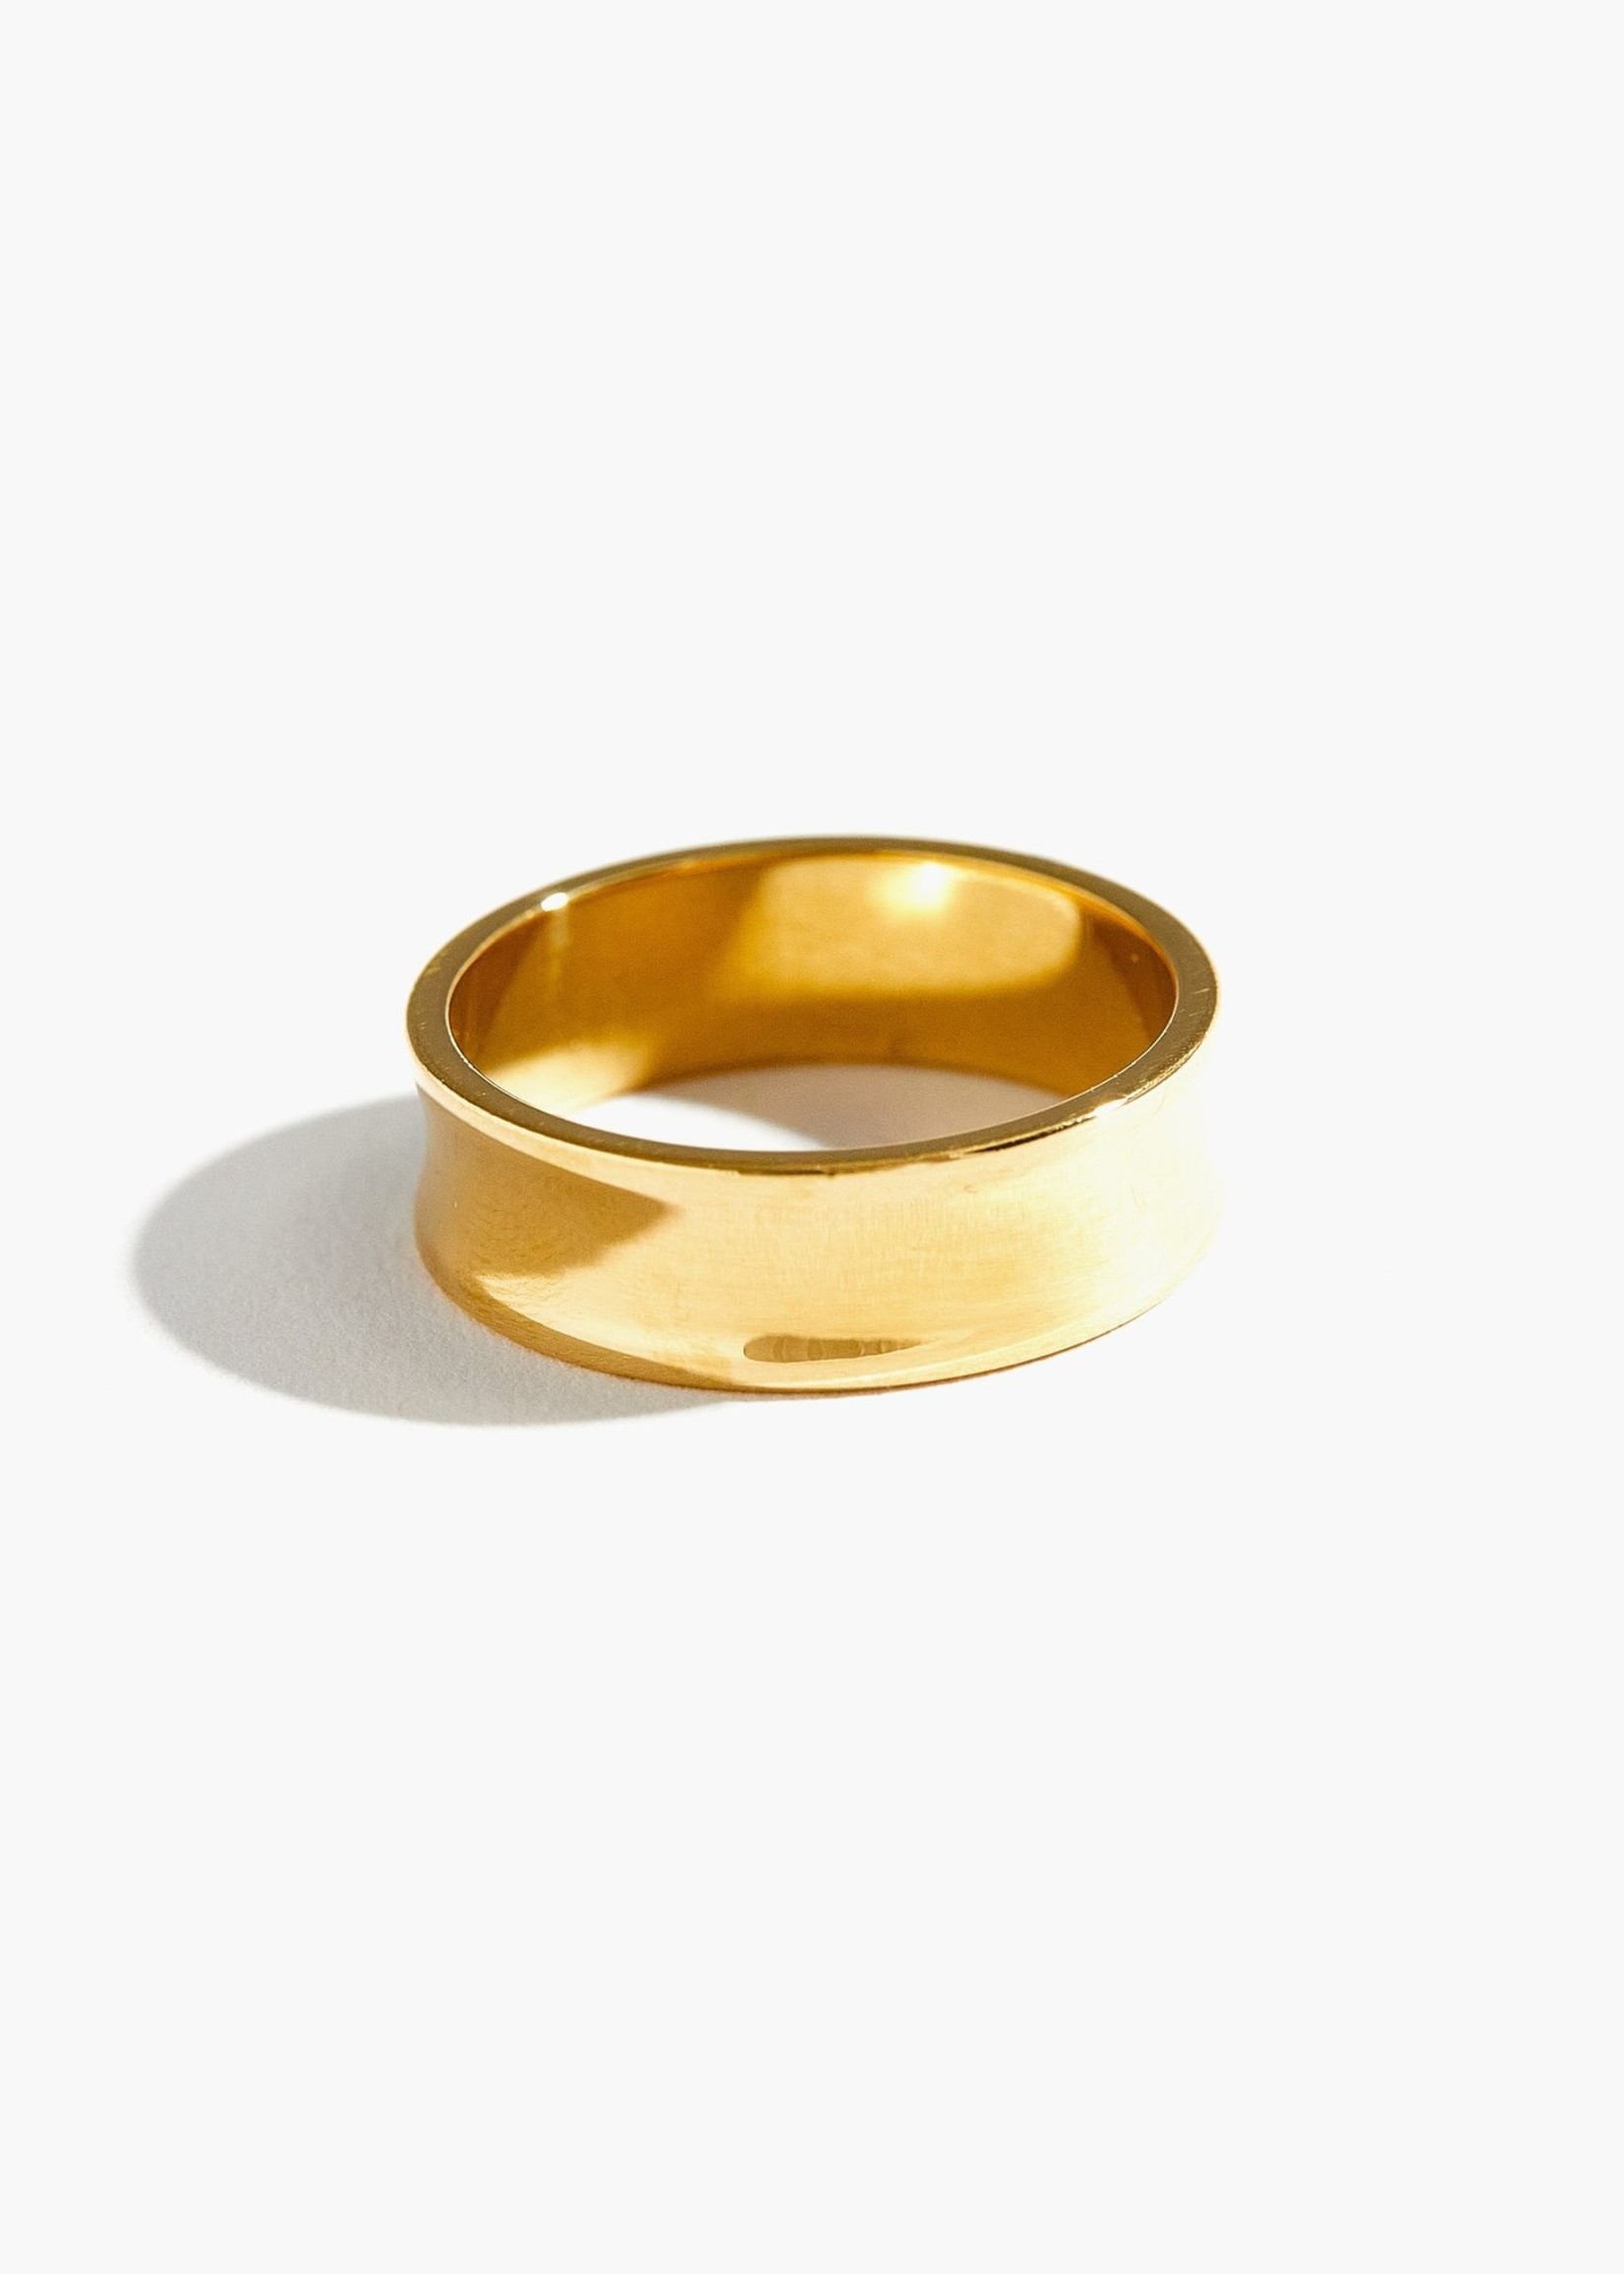 ABLE Sedona Ring - Gold